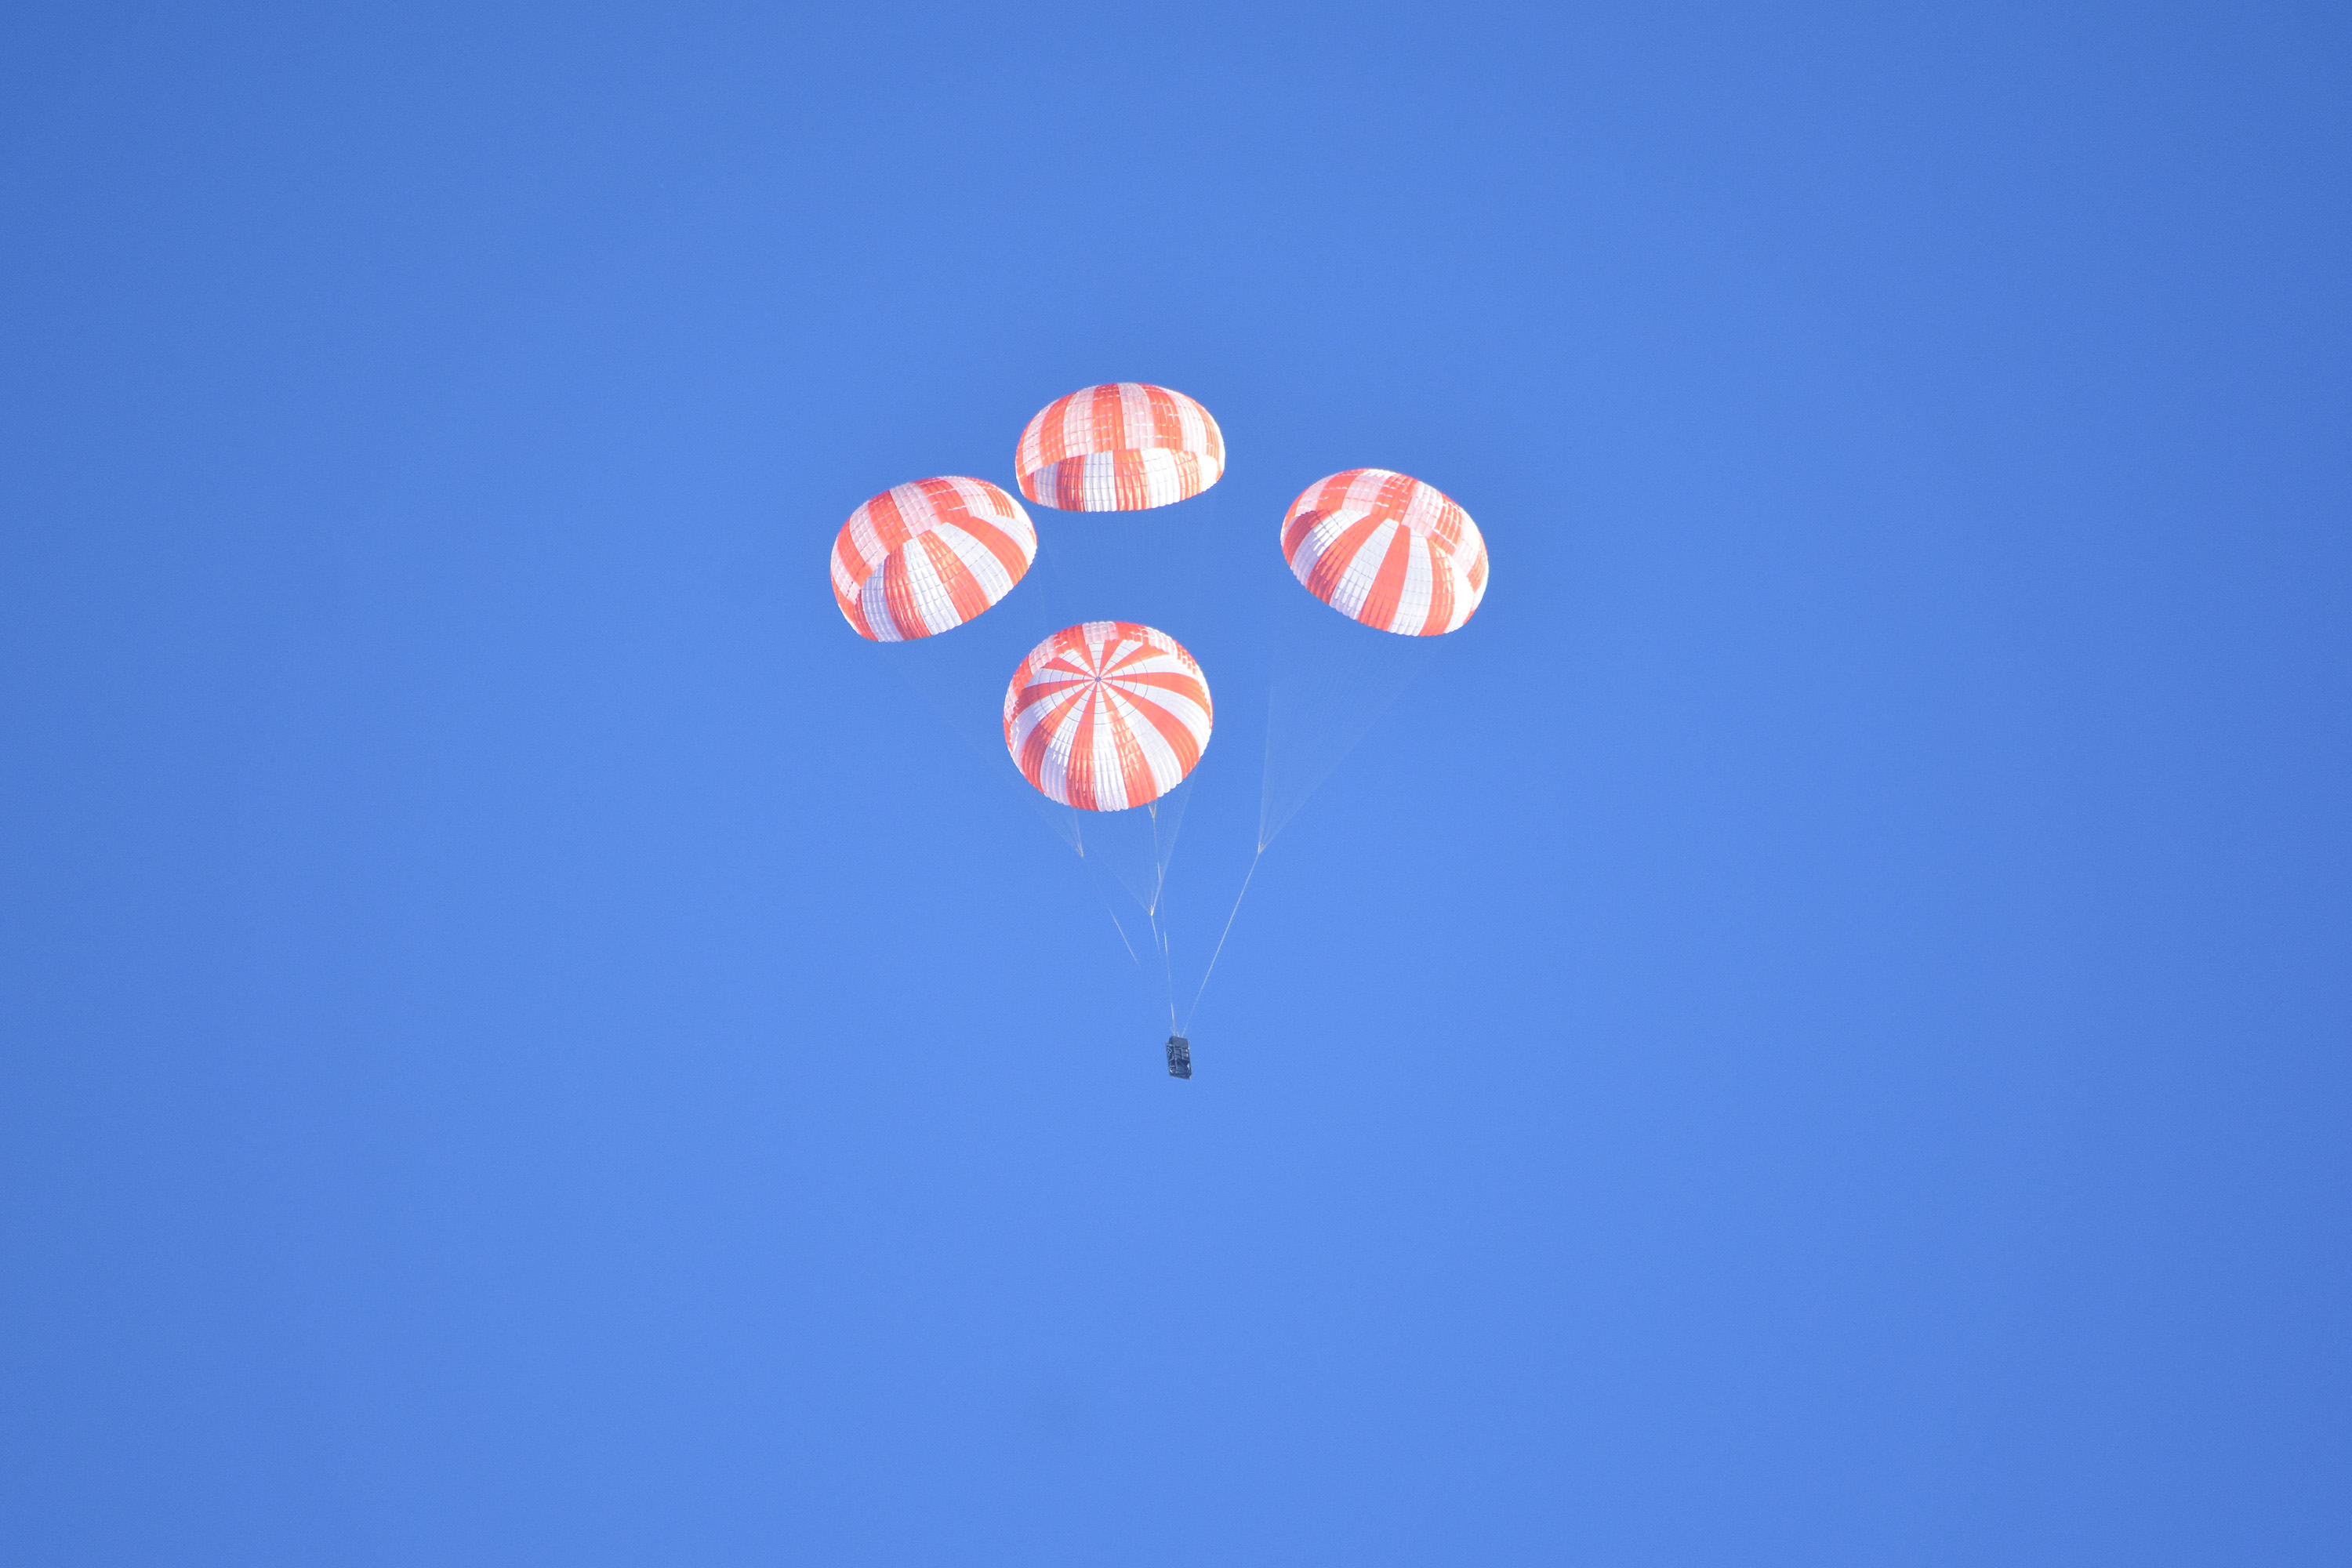 Parachute drop test for SpaceX crew Dragon involving  four red-and-white parachutes unfurled from a mass simulator high above the desert near Coolidge, Arizona. Credit NASA/SpaceX